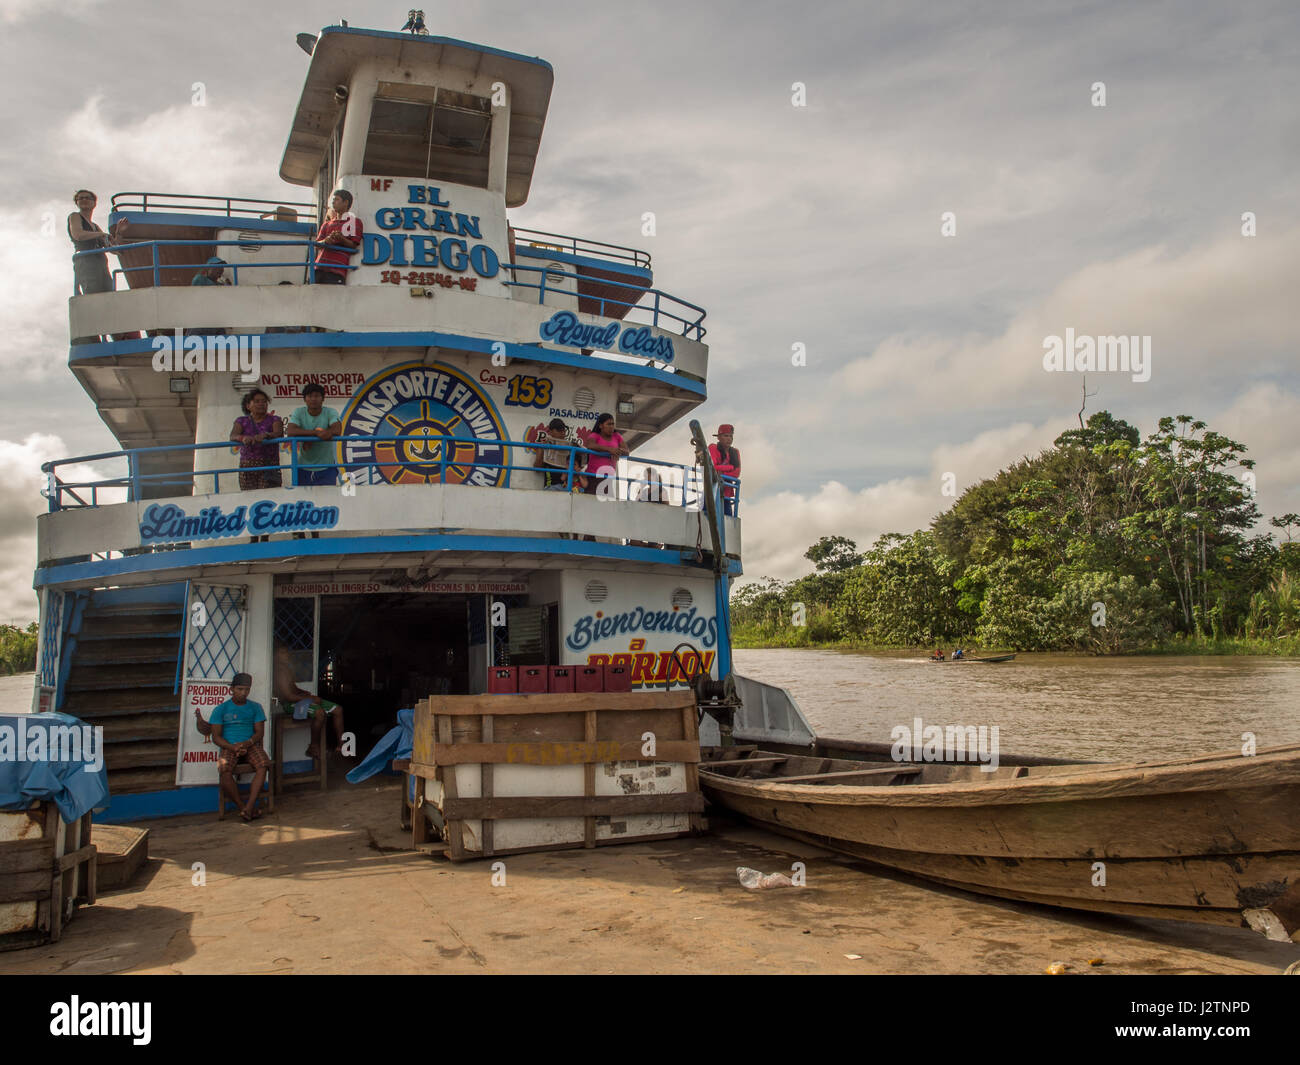 Amazon River, Peru - May 12, 2016: A passenger ferry and cargo on the Amazon river Stock Photo